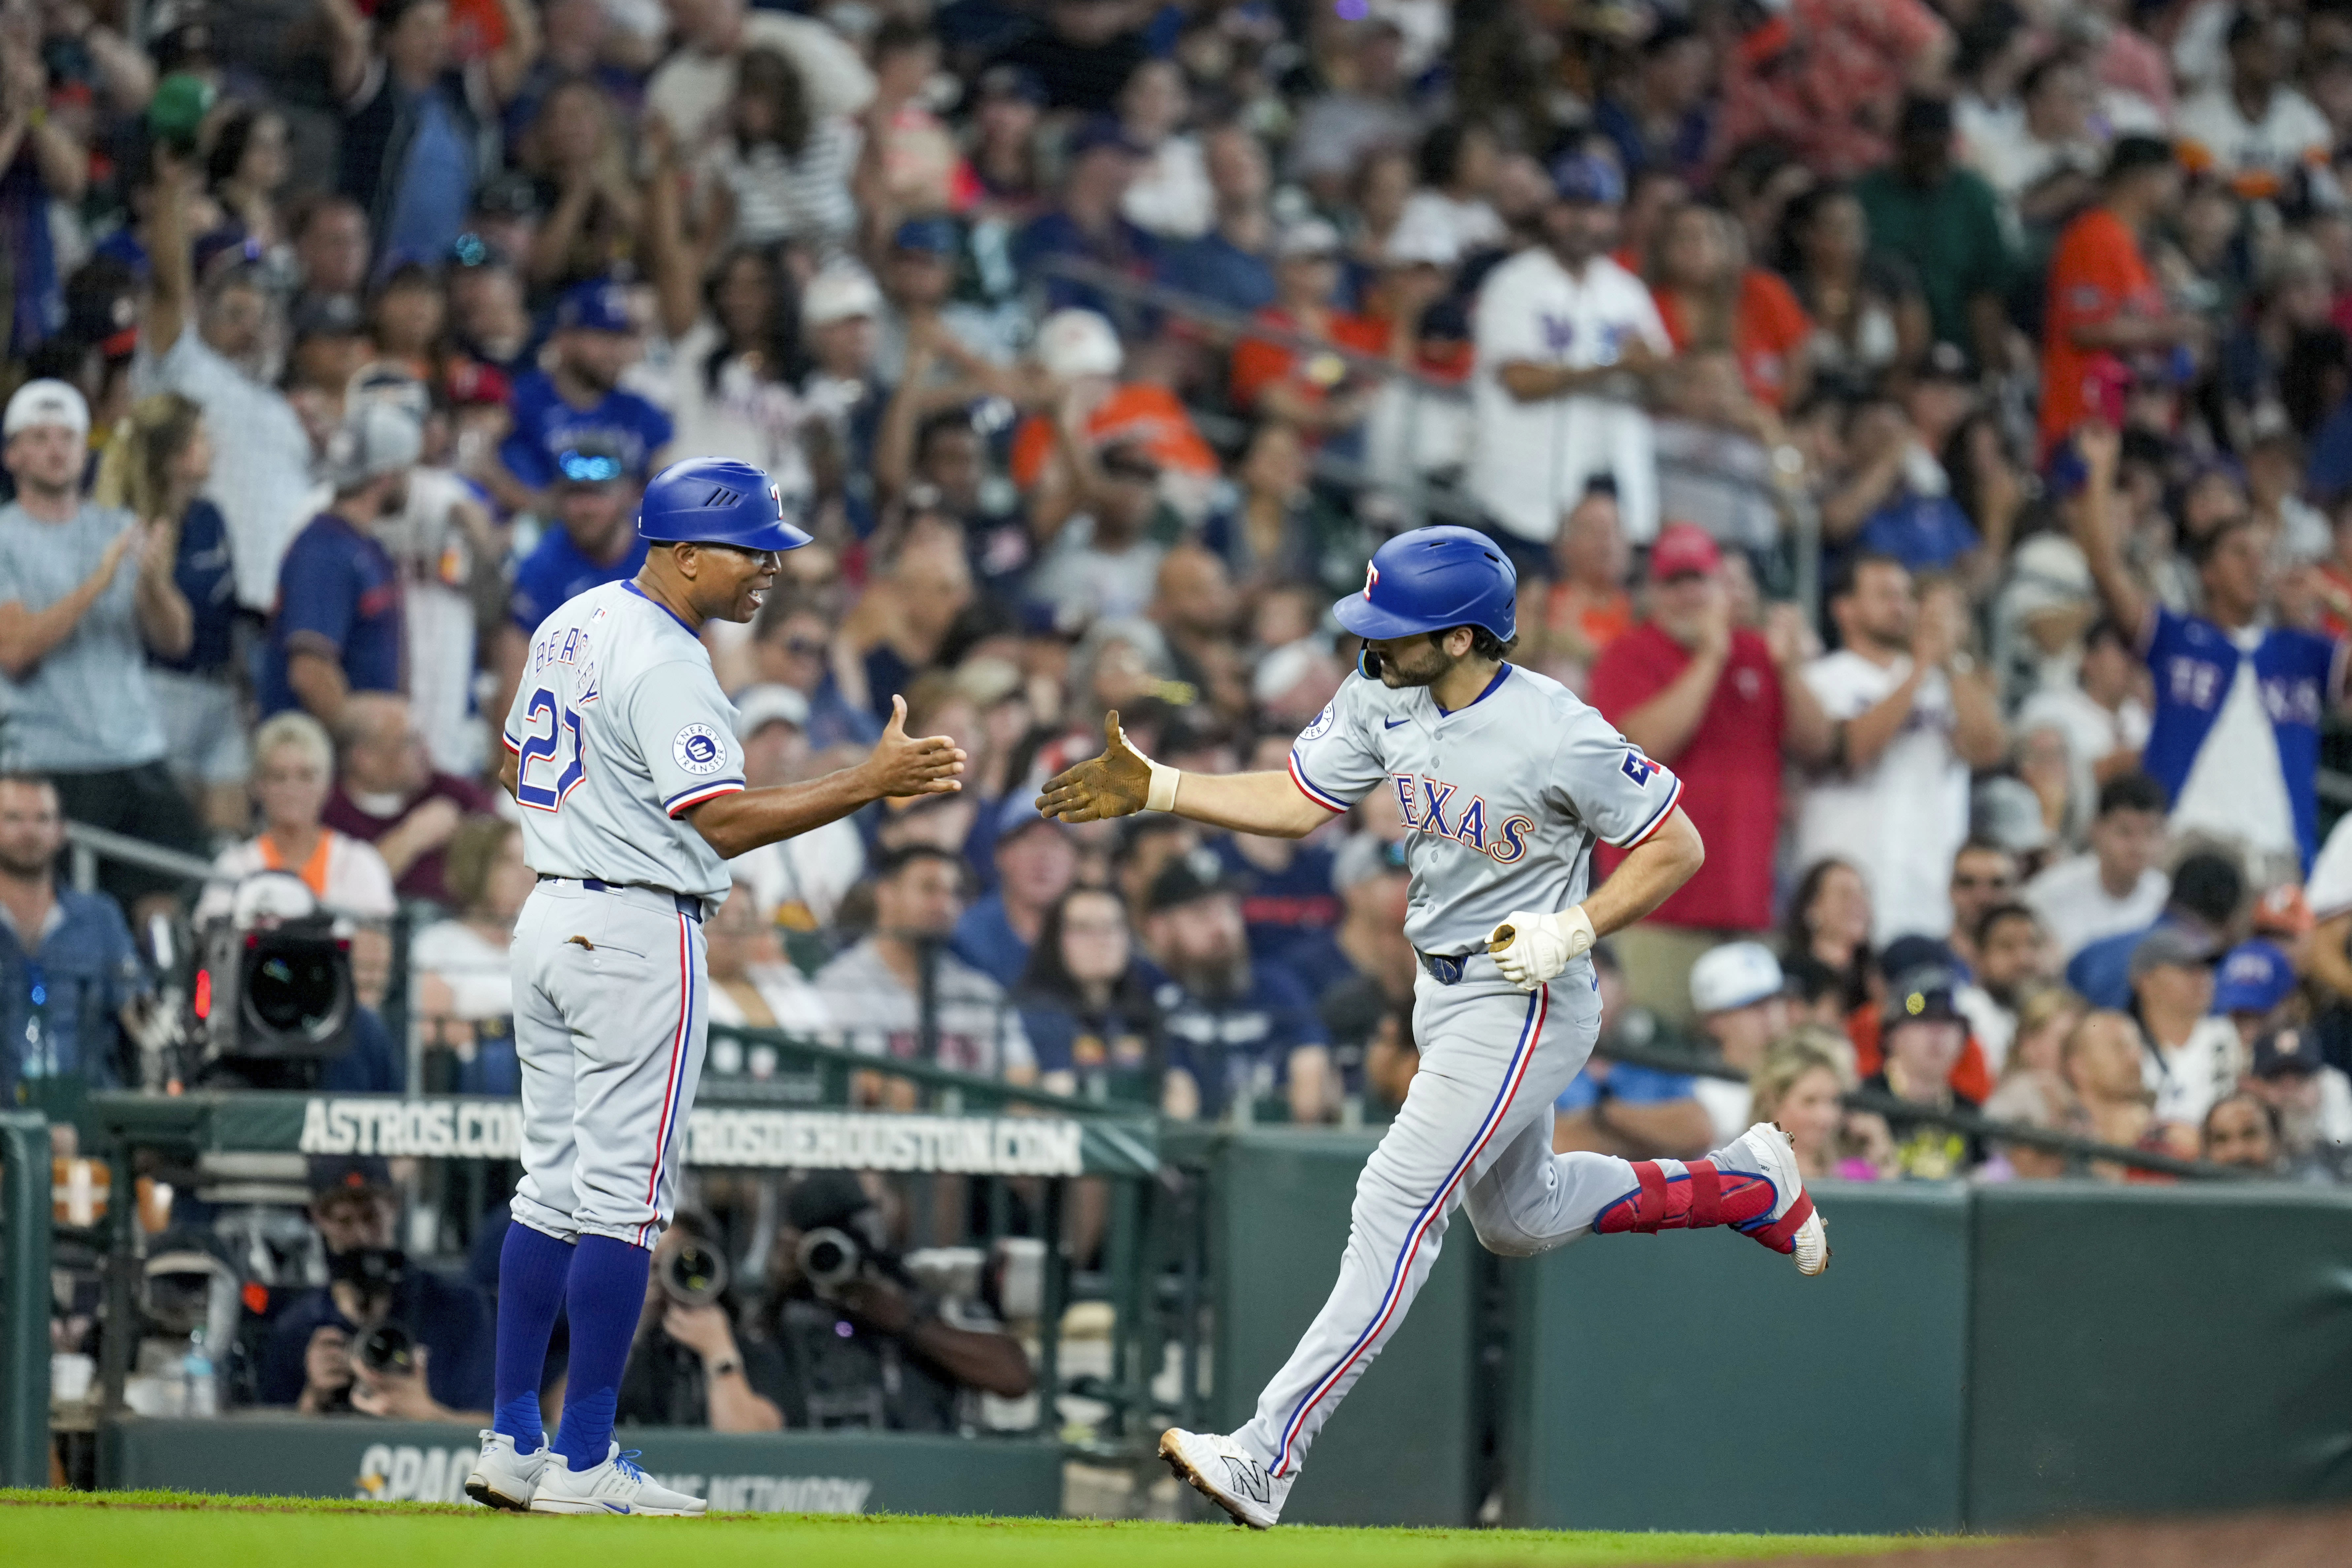 Josh Smith hits 2 two-run homers to lead Rangers to 4-2 win over Astros